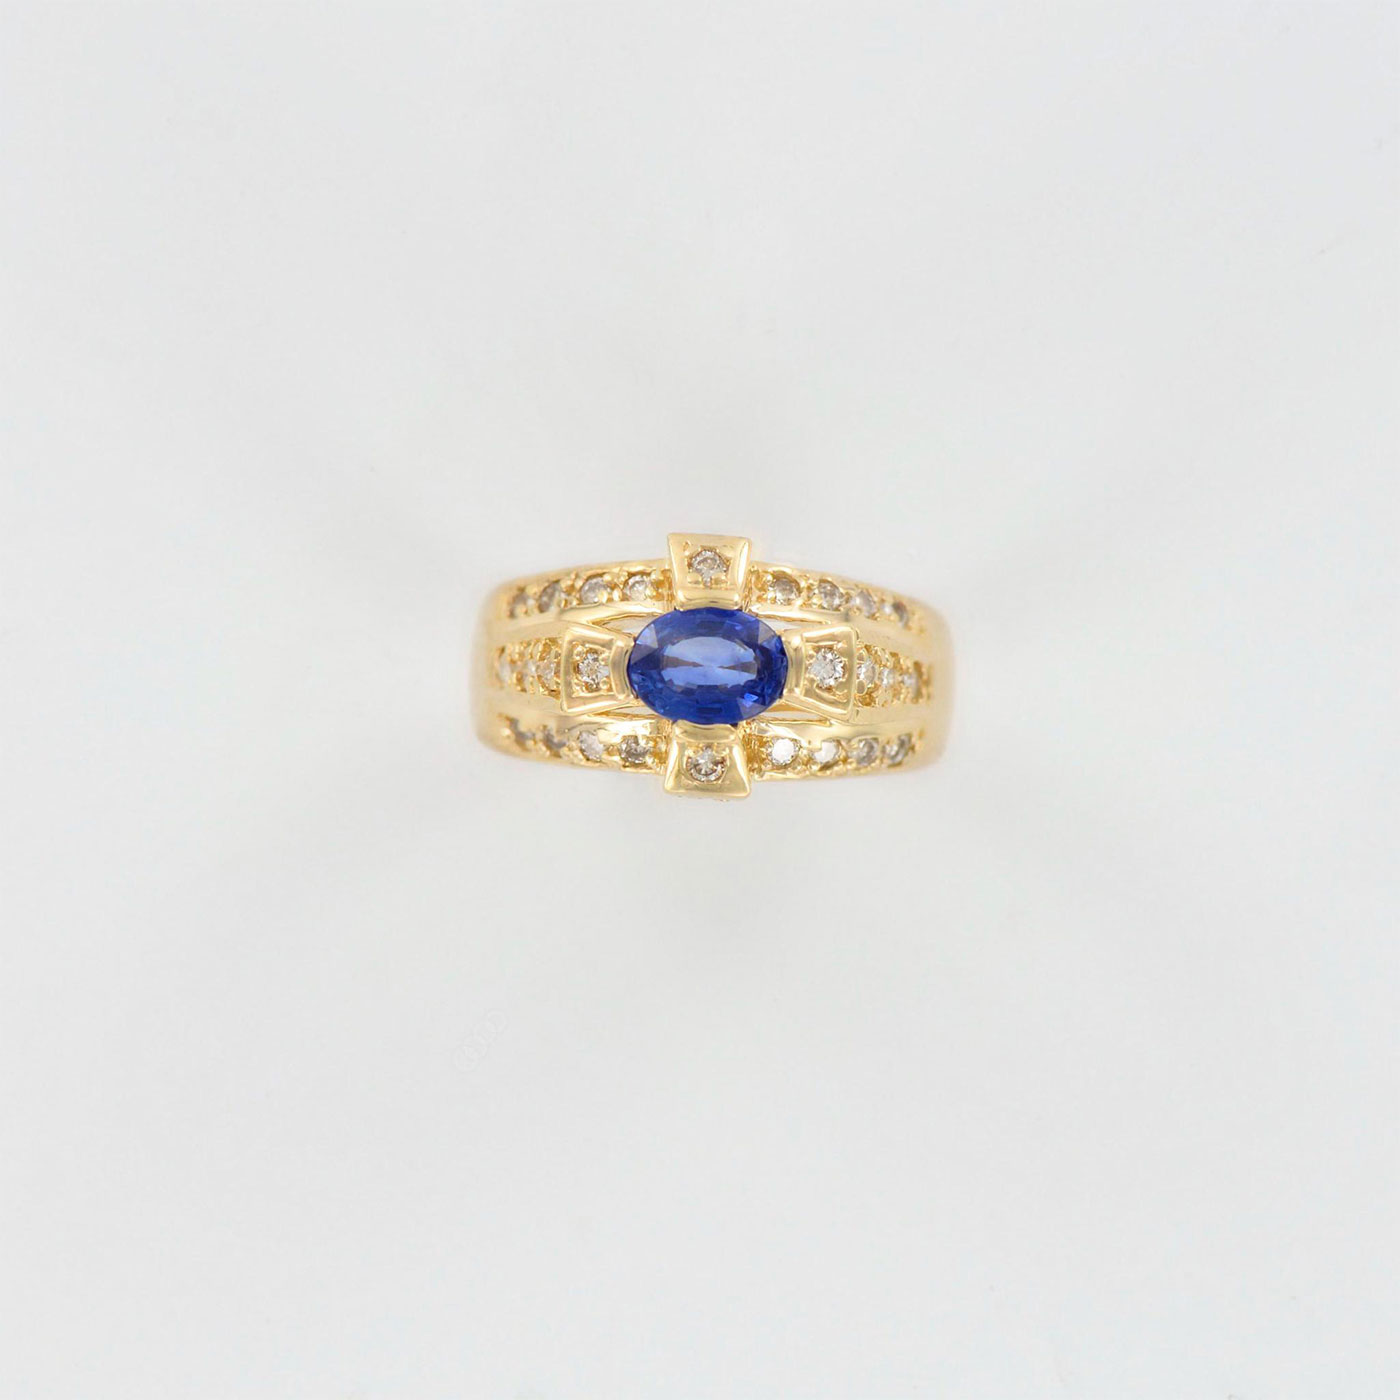 14K Yellow Gold Diamonds and Blue Sapphire Statement Ring - Image 5 of 5